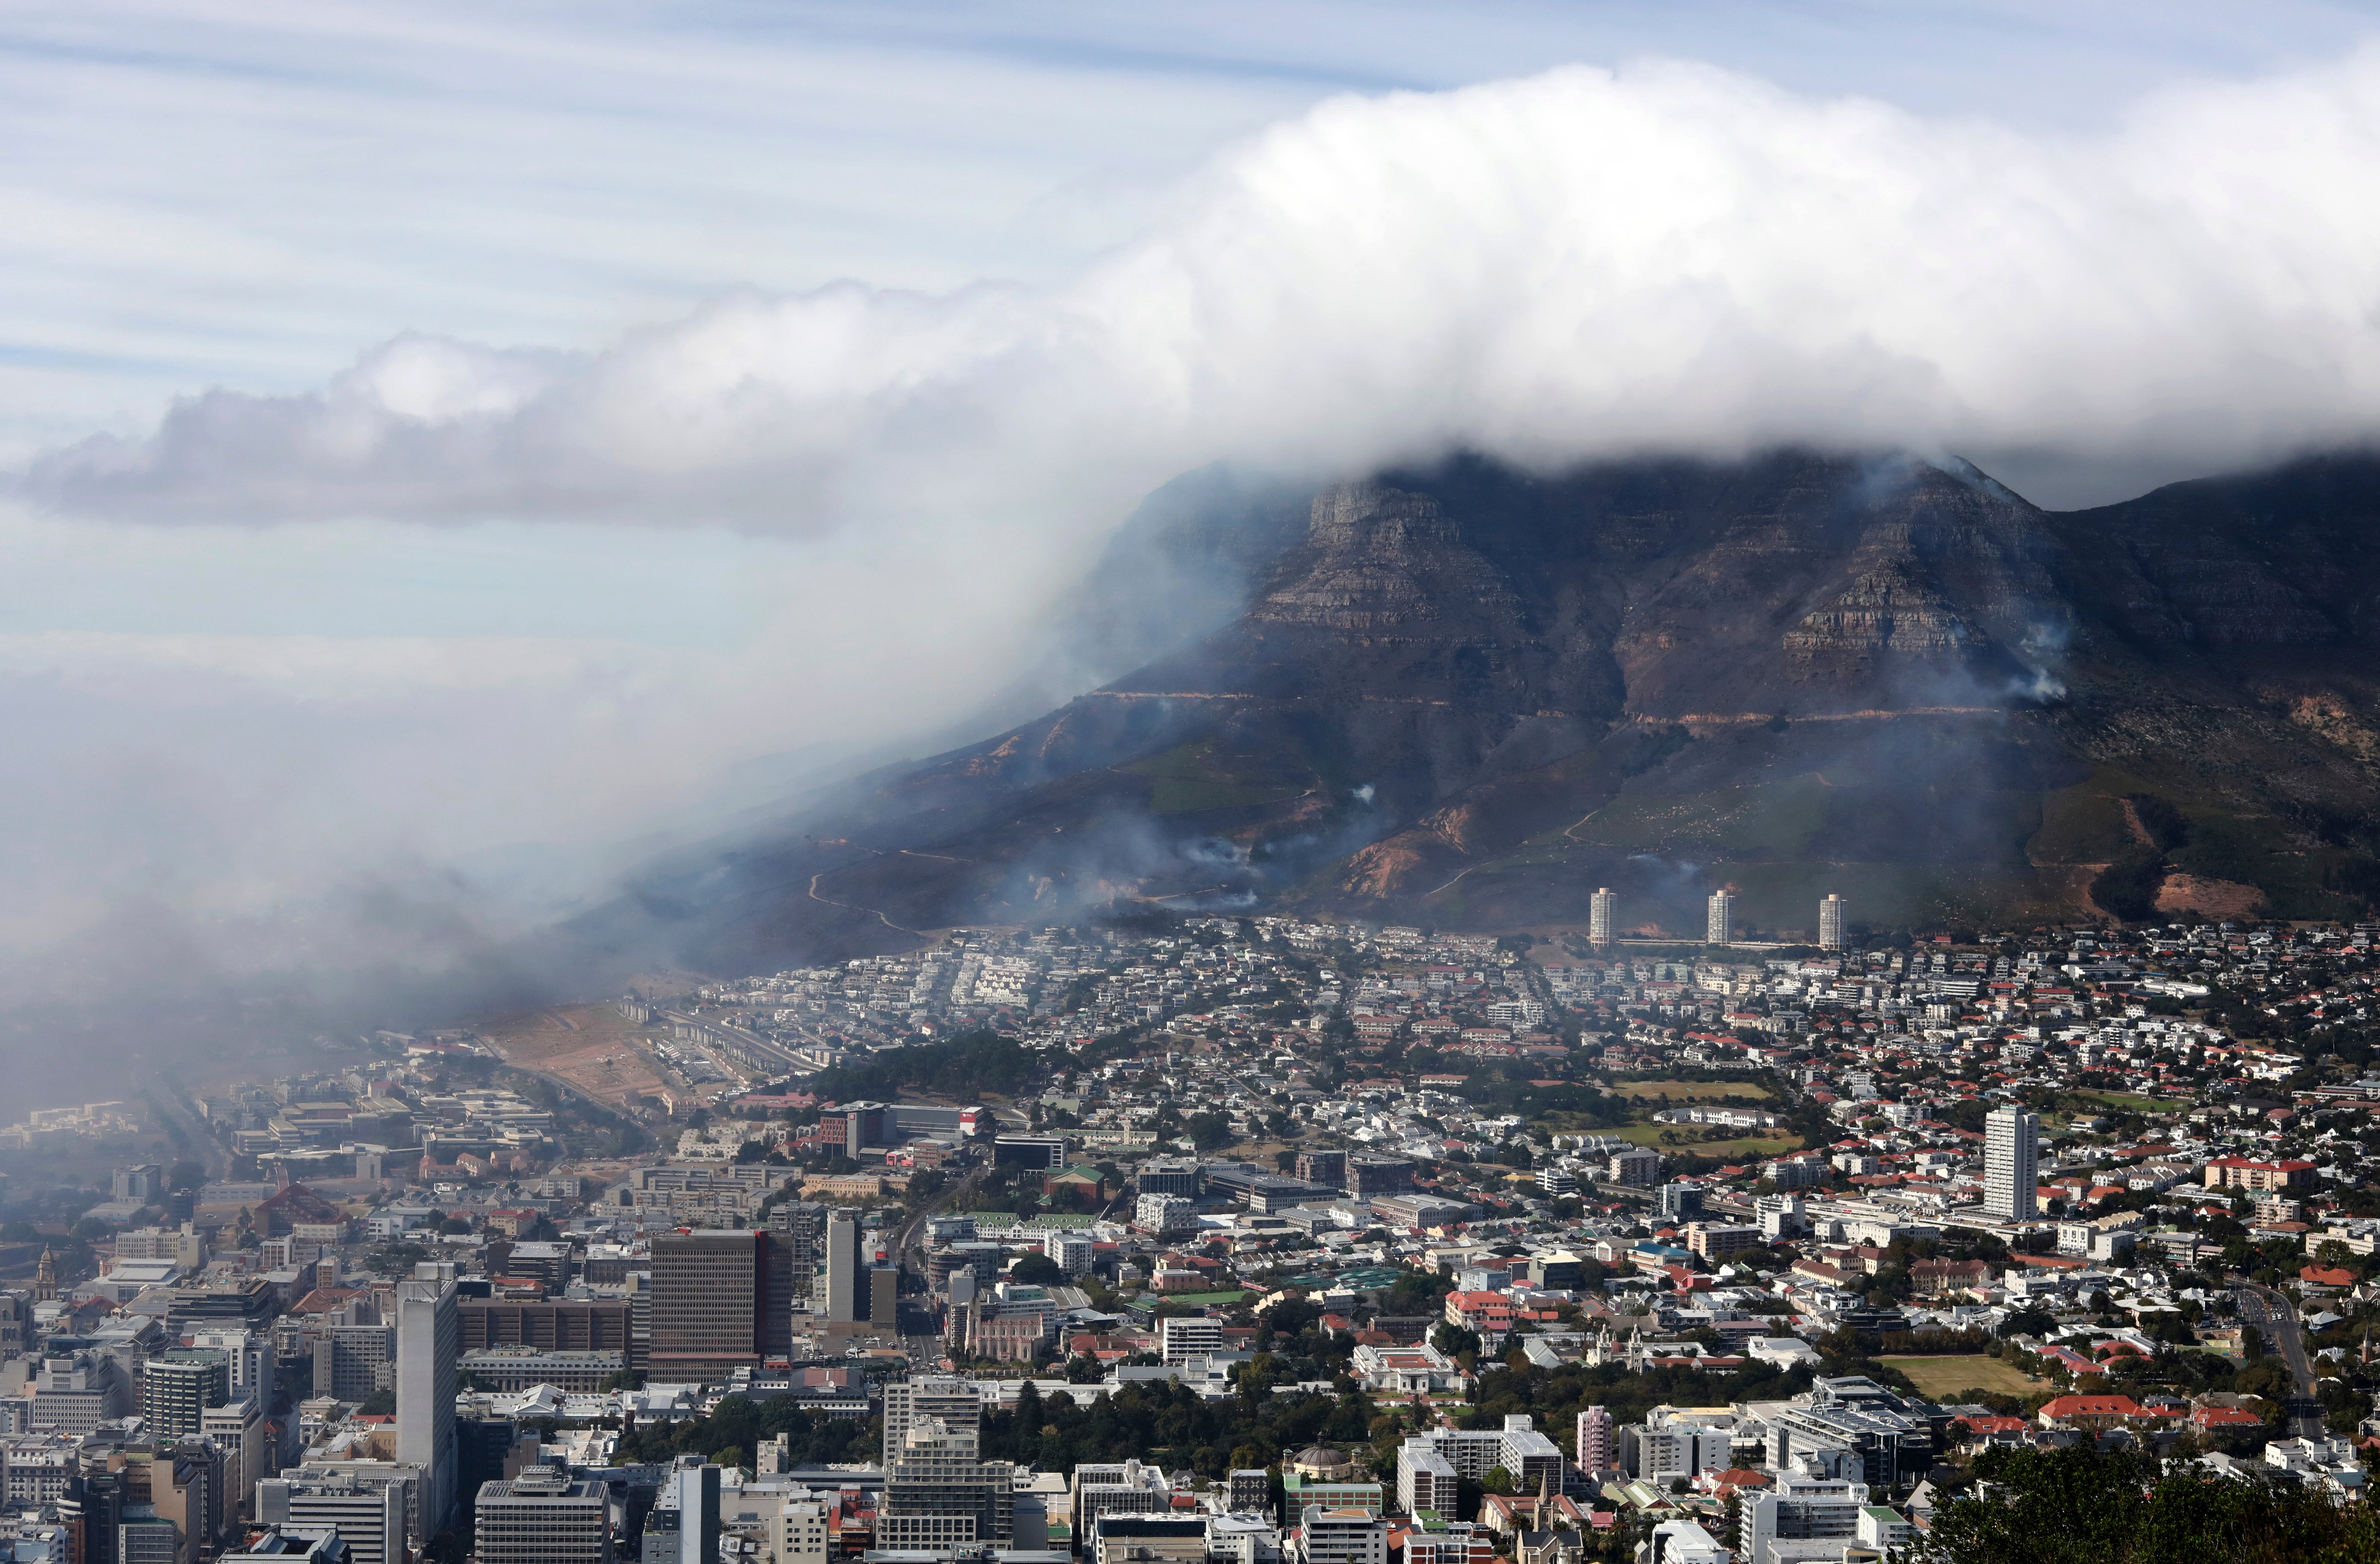 General view of the city of Cape Town, South Africa